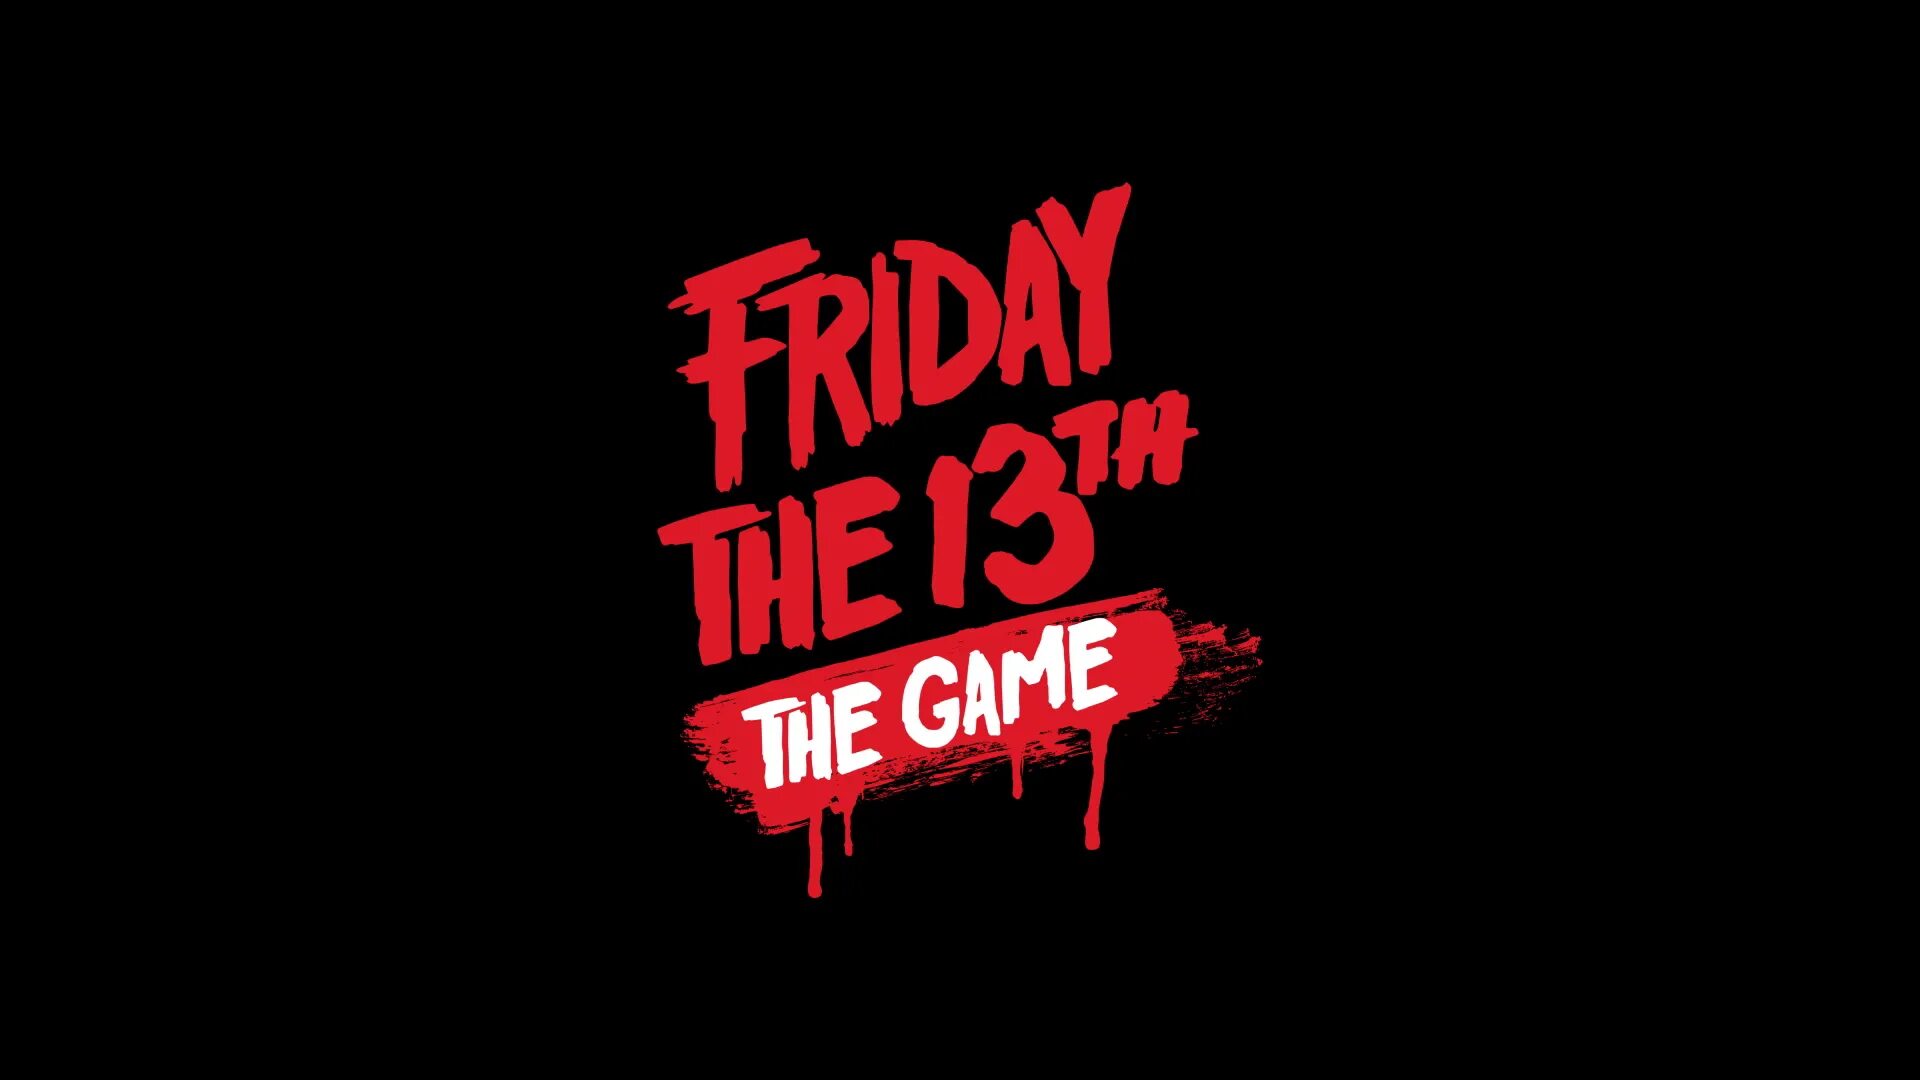 This my friday. Friday the 13th the game логотип. Пятница 13 лого. Пятница 13 игра логотип.